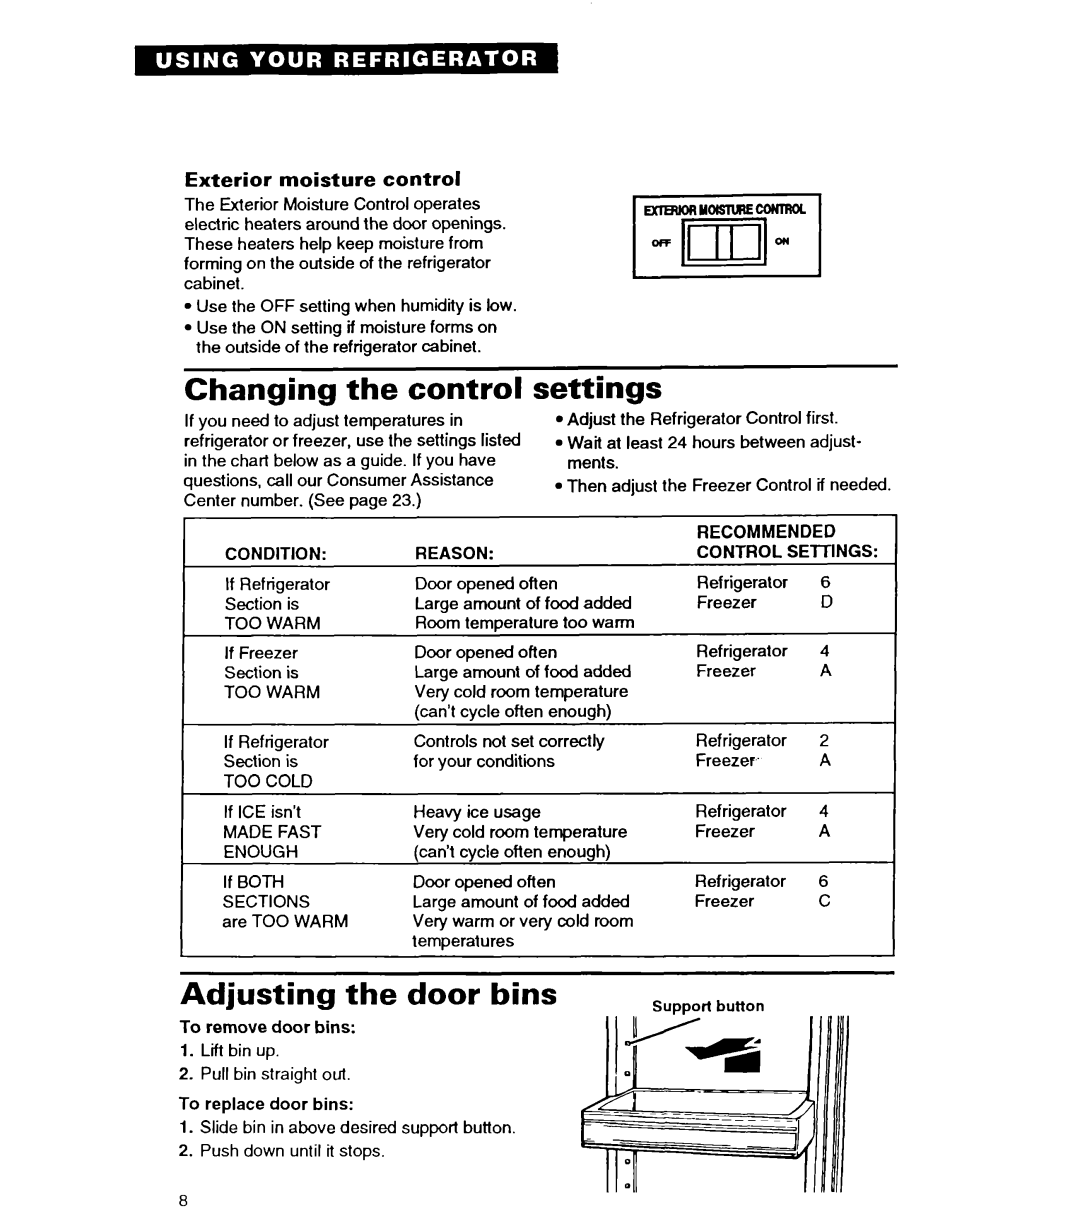 Whirlpool ET22DQ warranty ExlmoRYdlsTllRE~, 117171, Changing the control, settings, Adjusting the door bins 